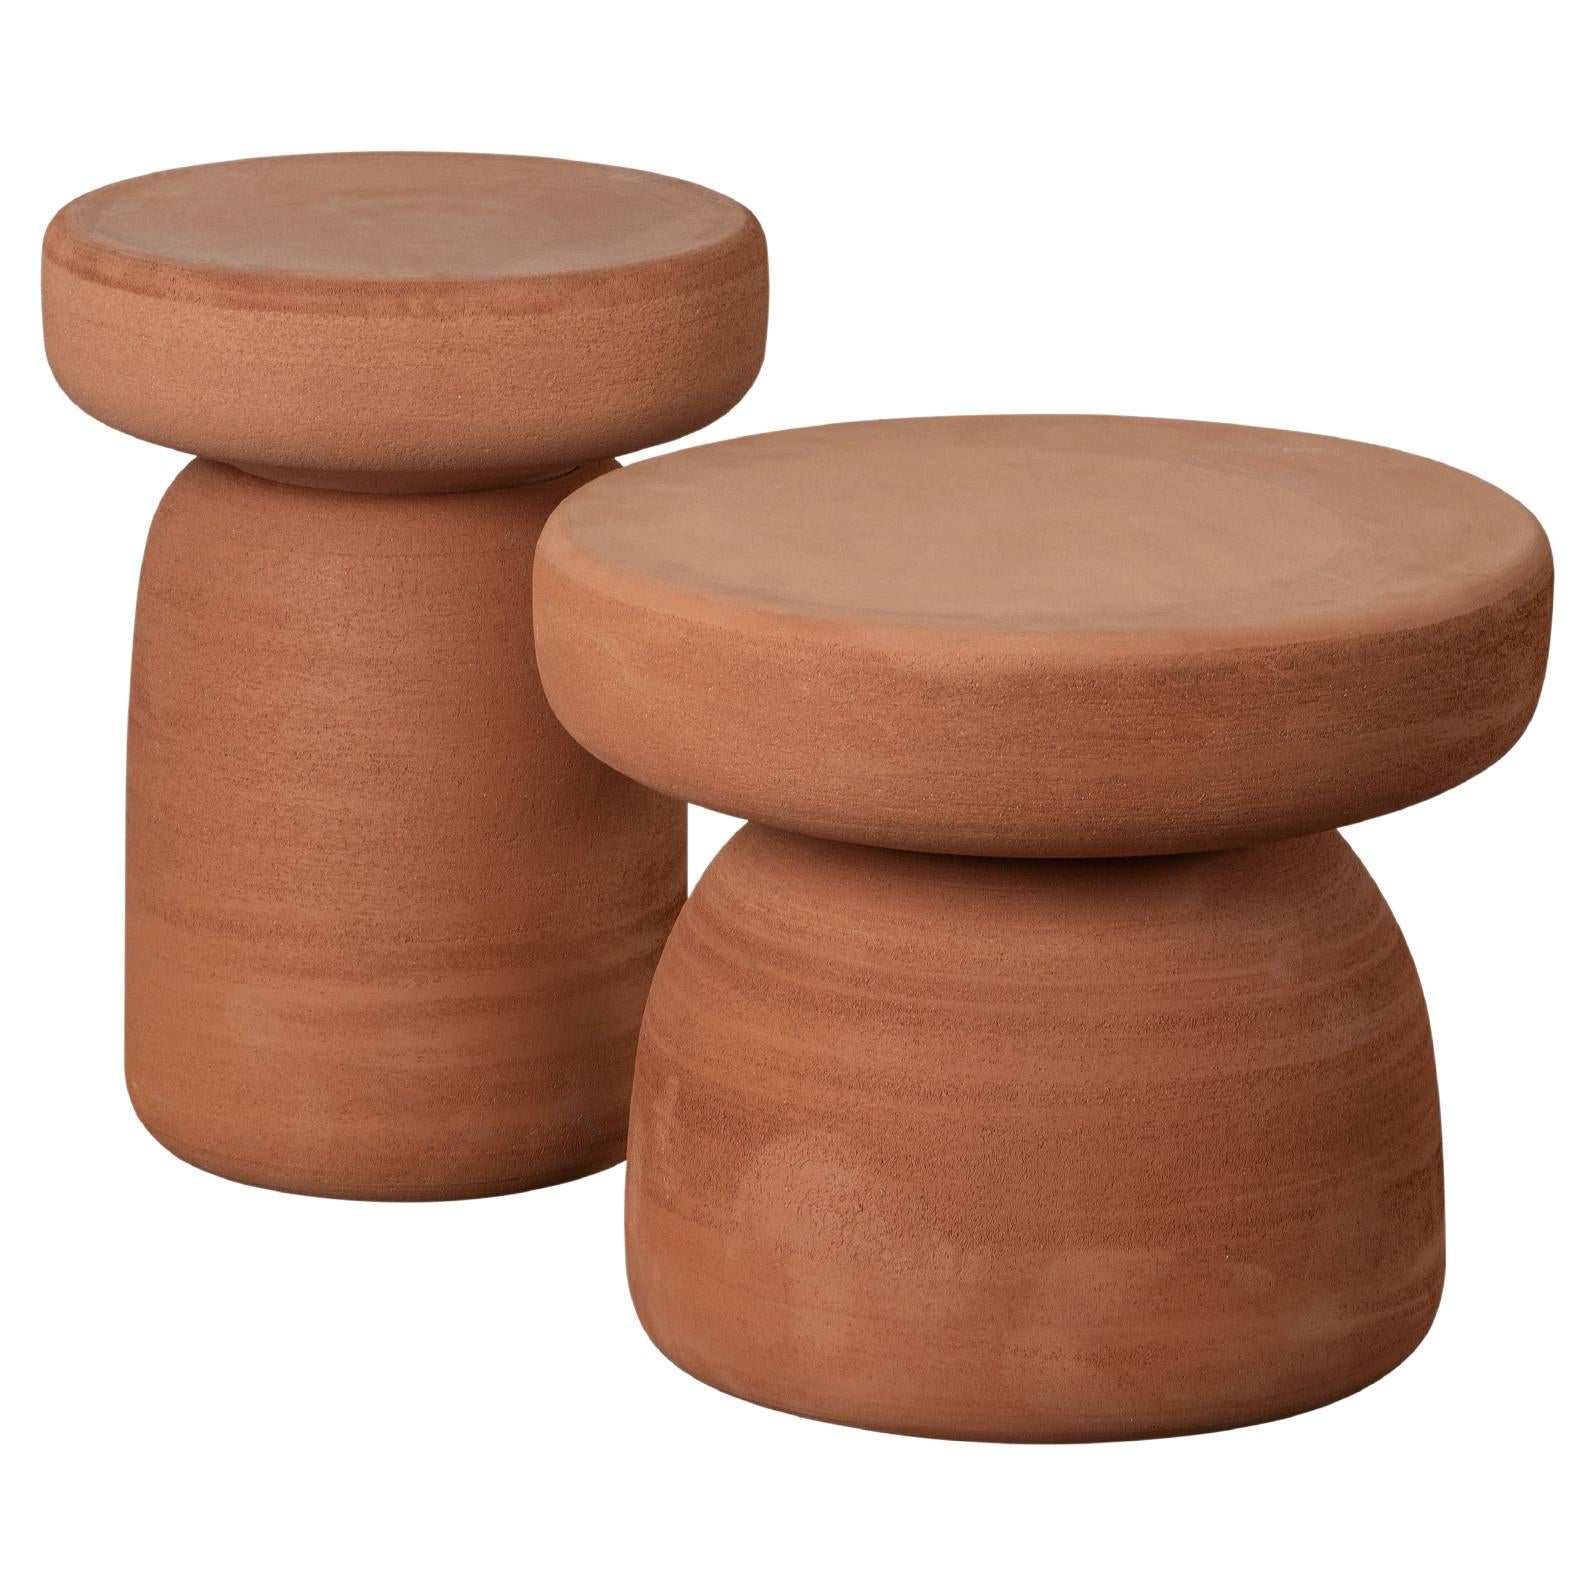 Tototo' Coffee Table in Hard Rock Terracotta by Paolo Cappello and Simone  Sabati For Sale at 1stDibs